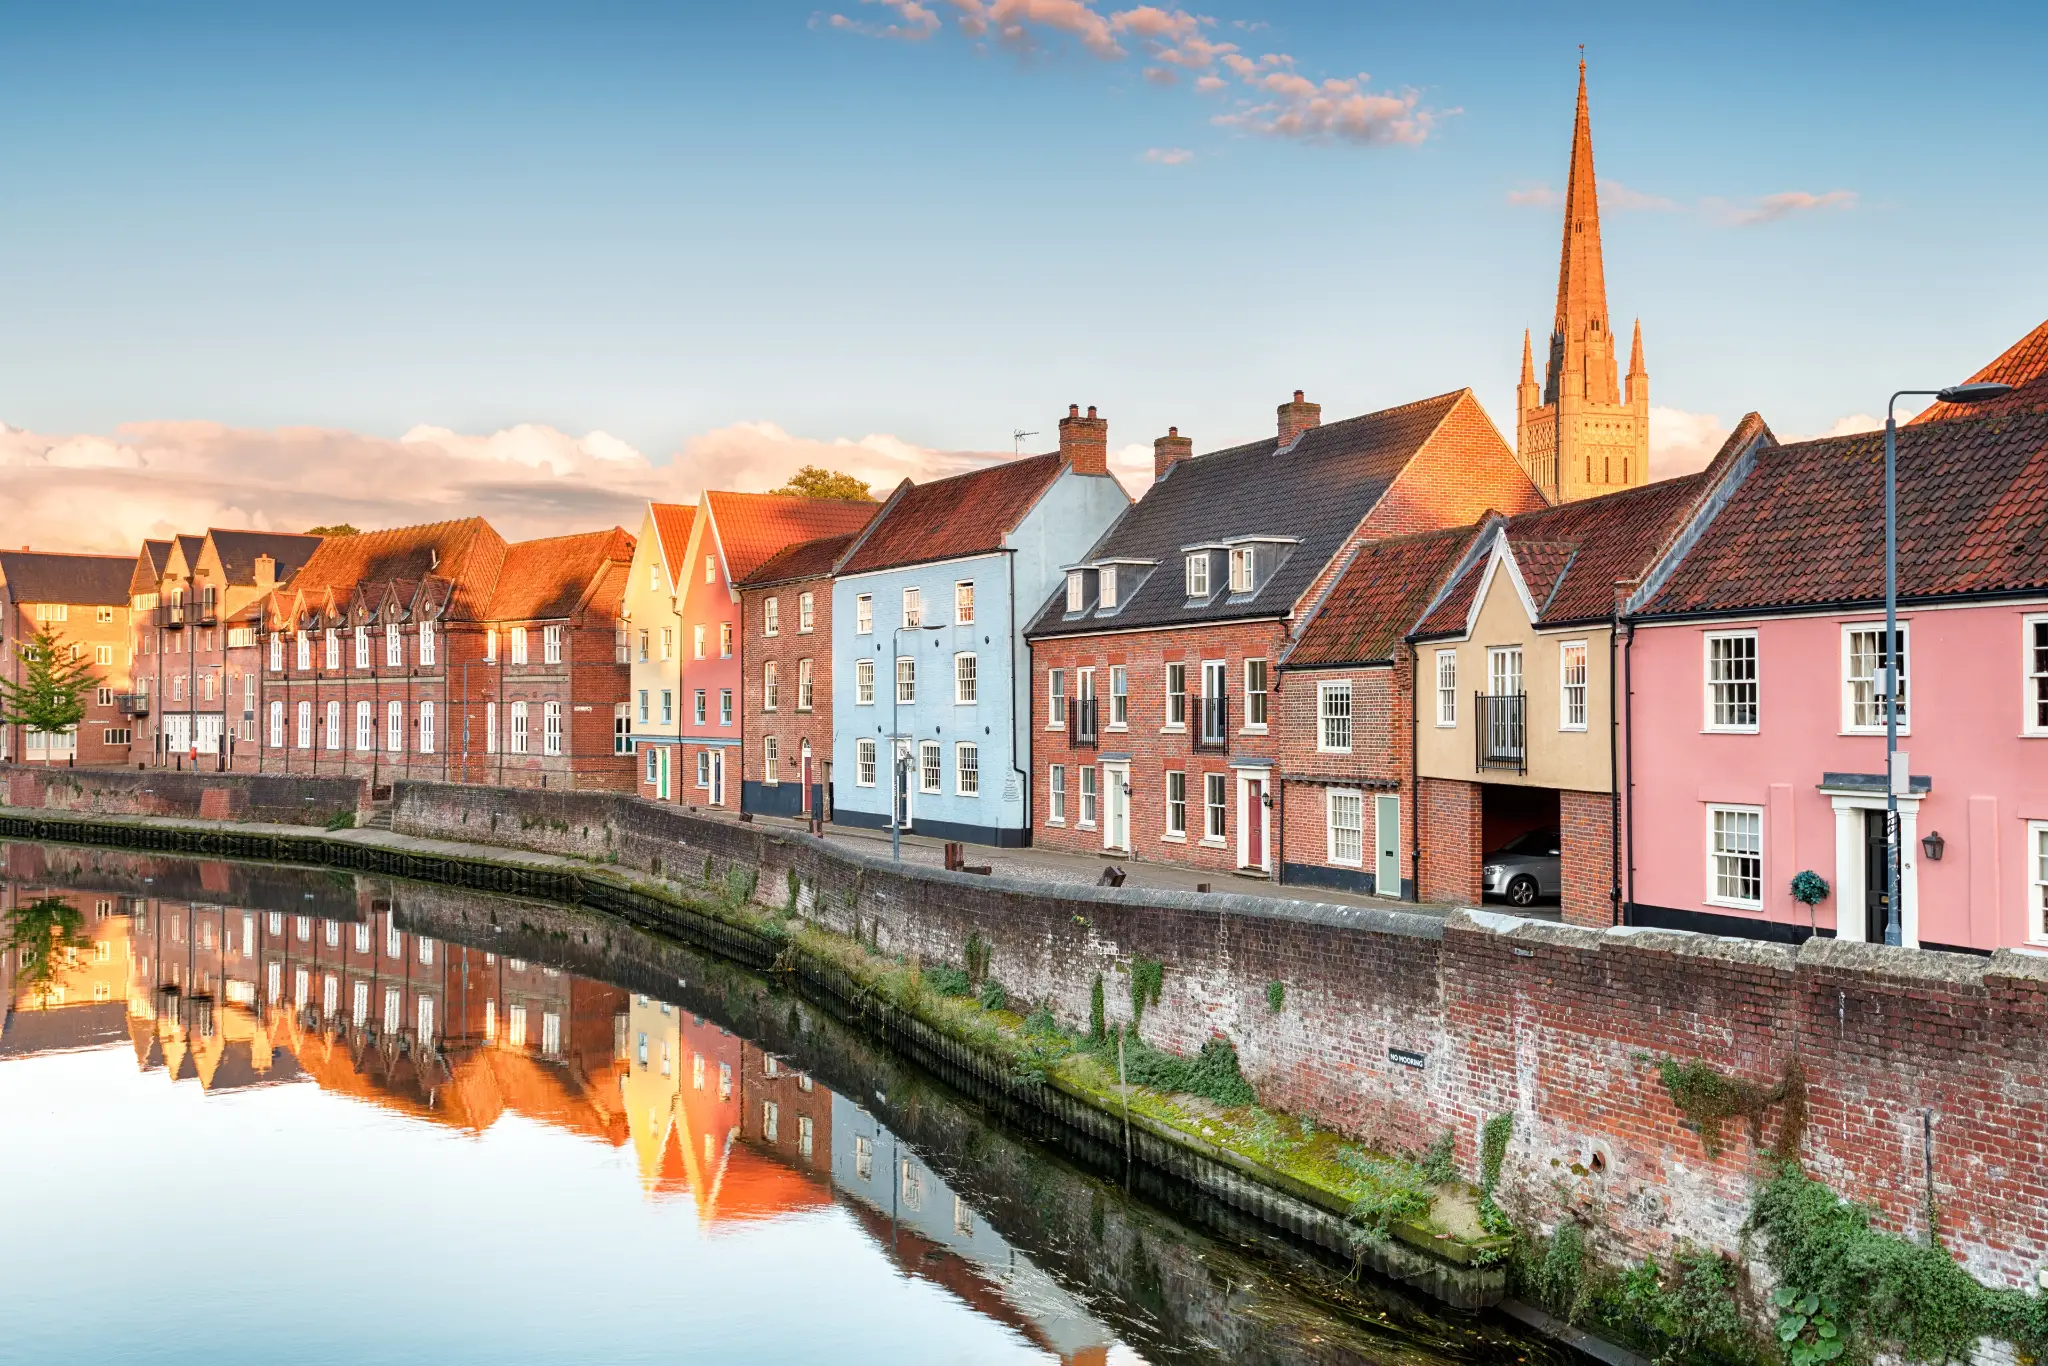 Norwich has many things to do in Norwich including exploring the river as seen in the photo